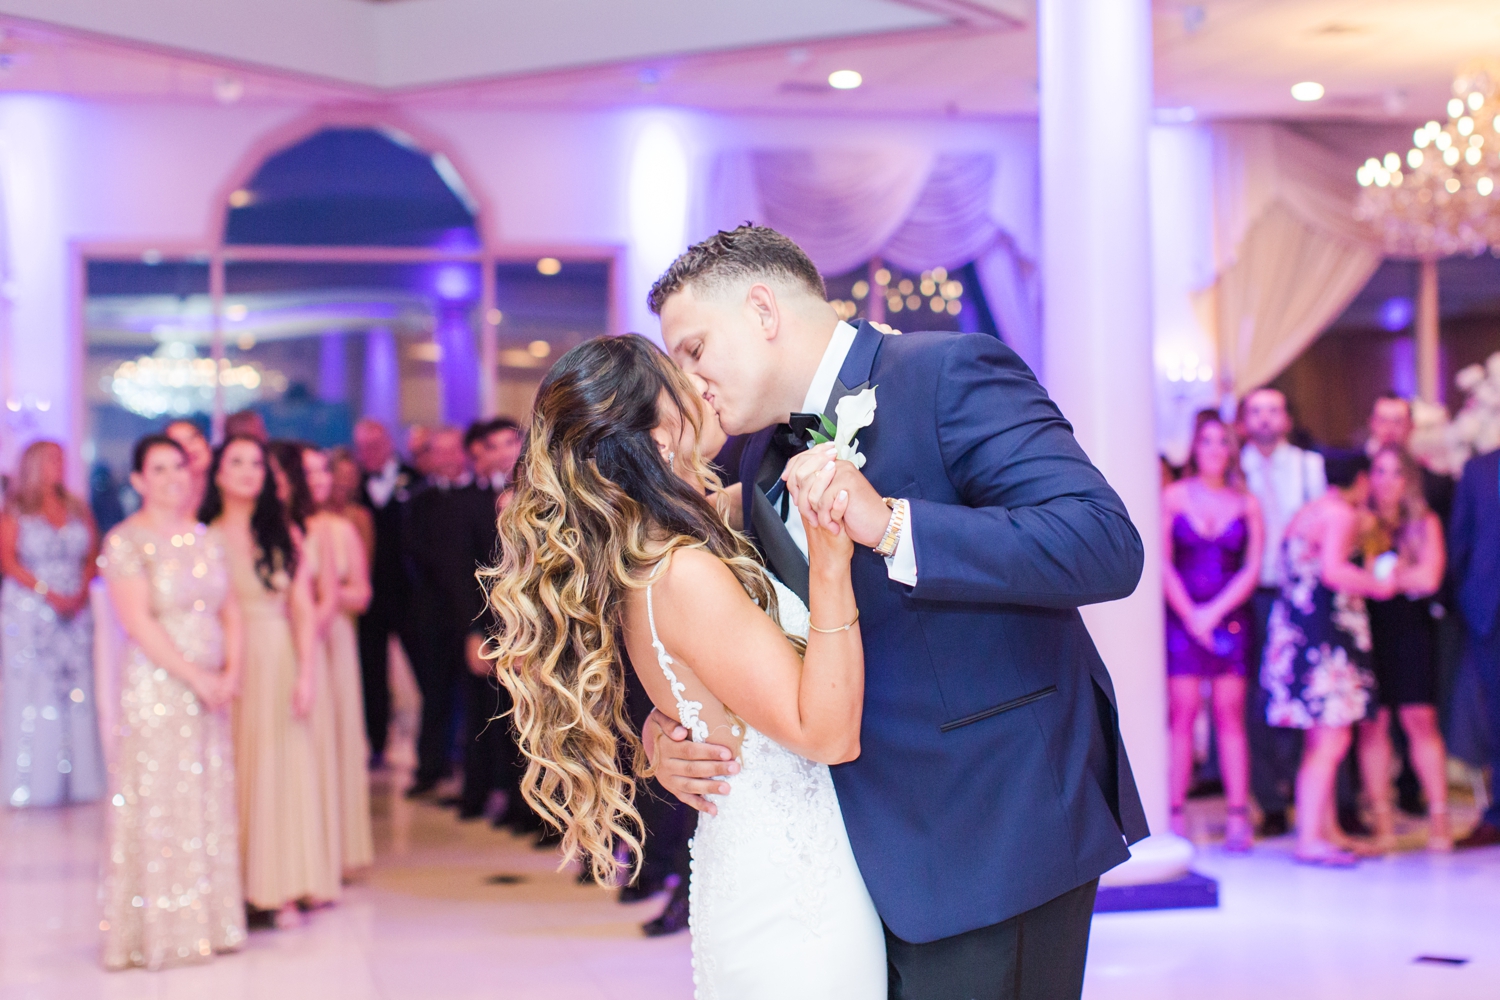 greentree-country-club-wedding-new-rochelle-ny-connecticut-photographer-shaina-lee-photography-photo